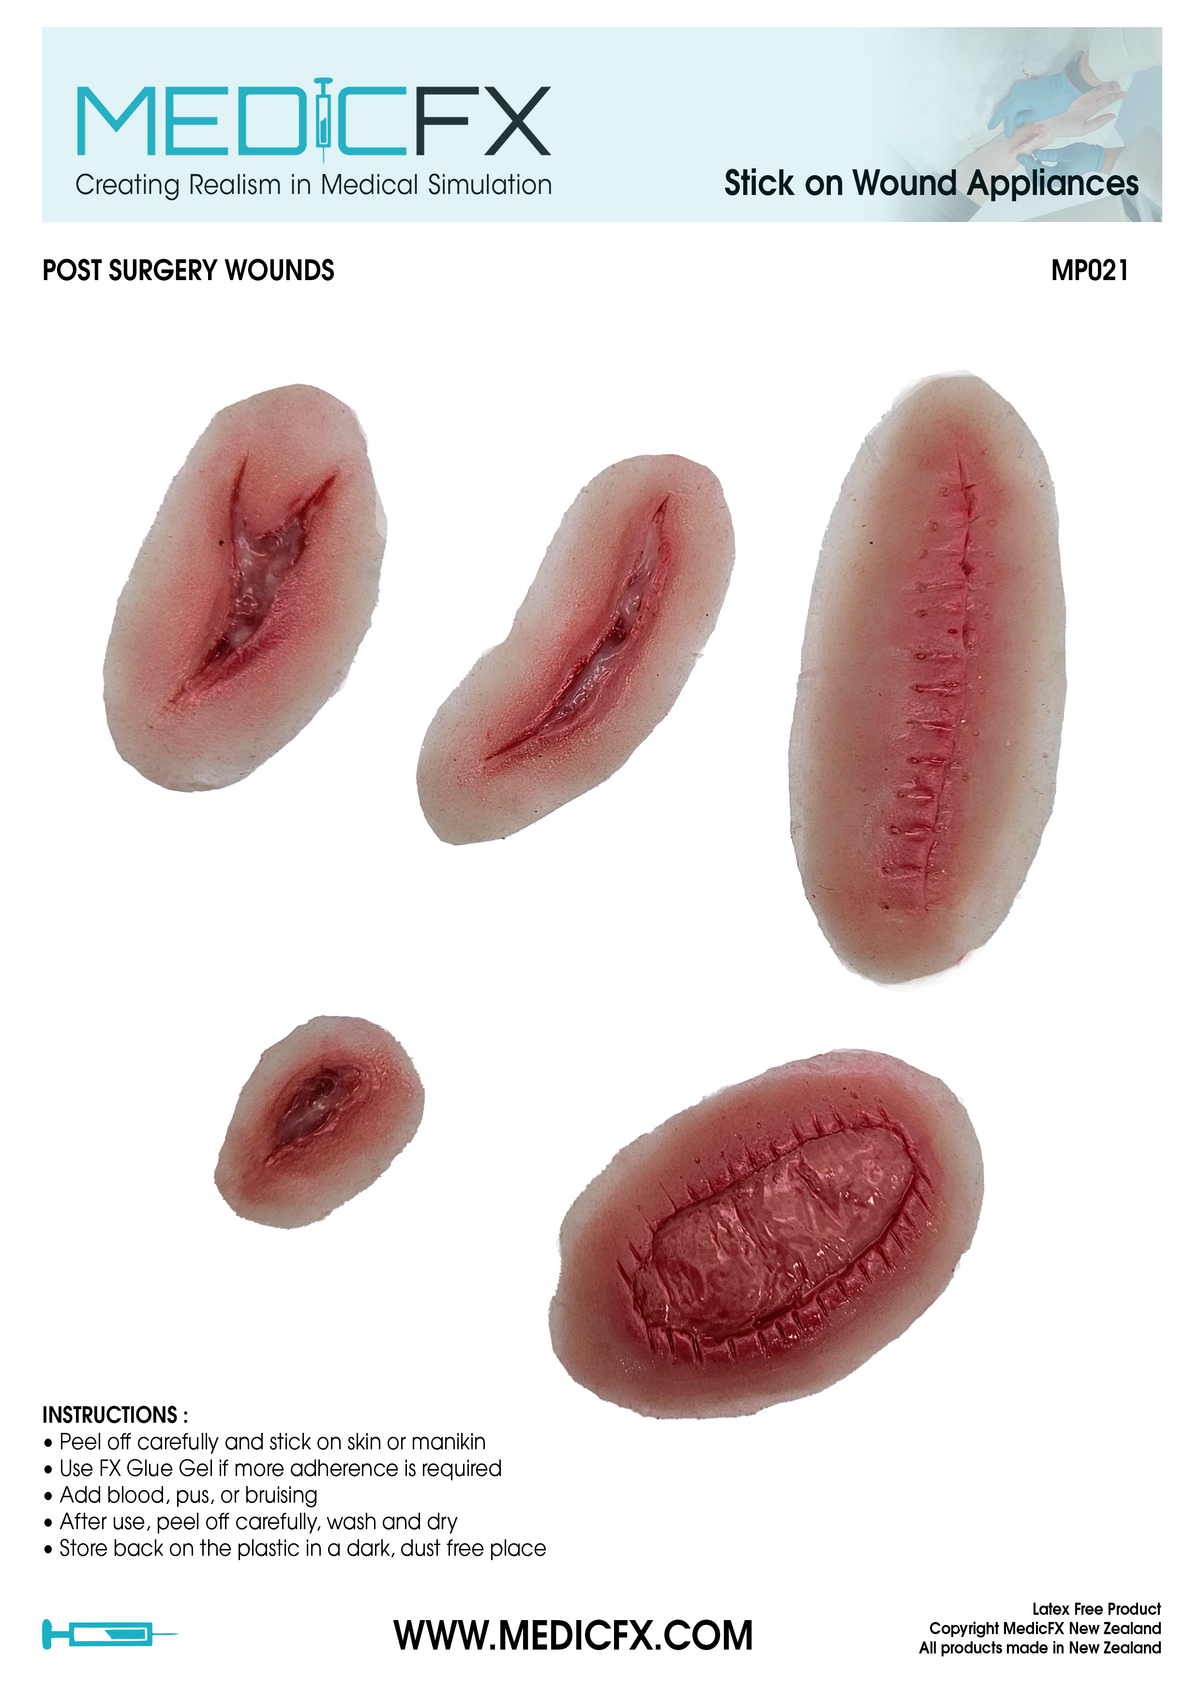 MP021 Sheet Post Surgical Wounds